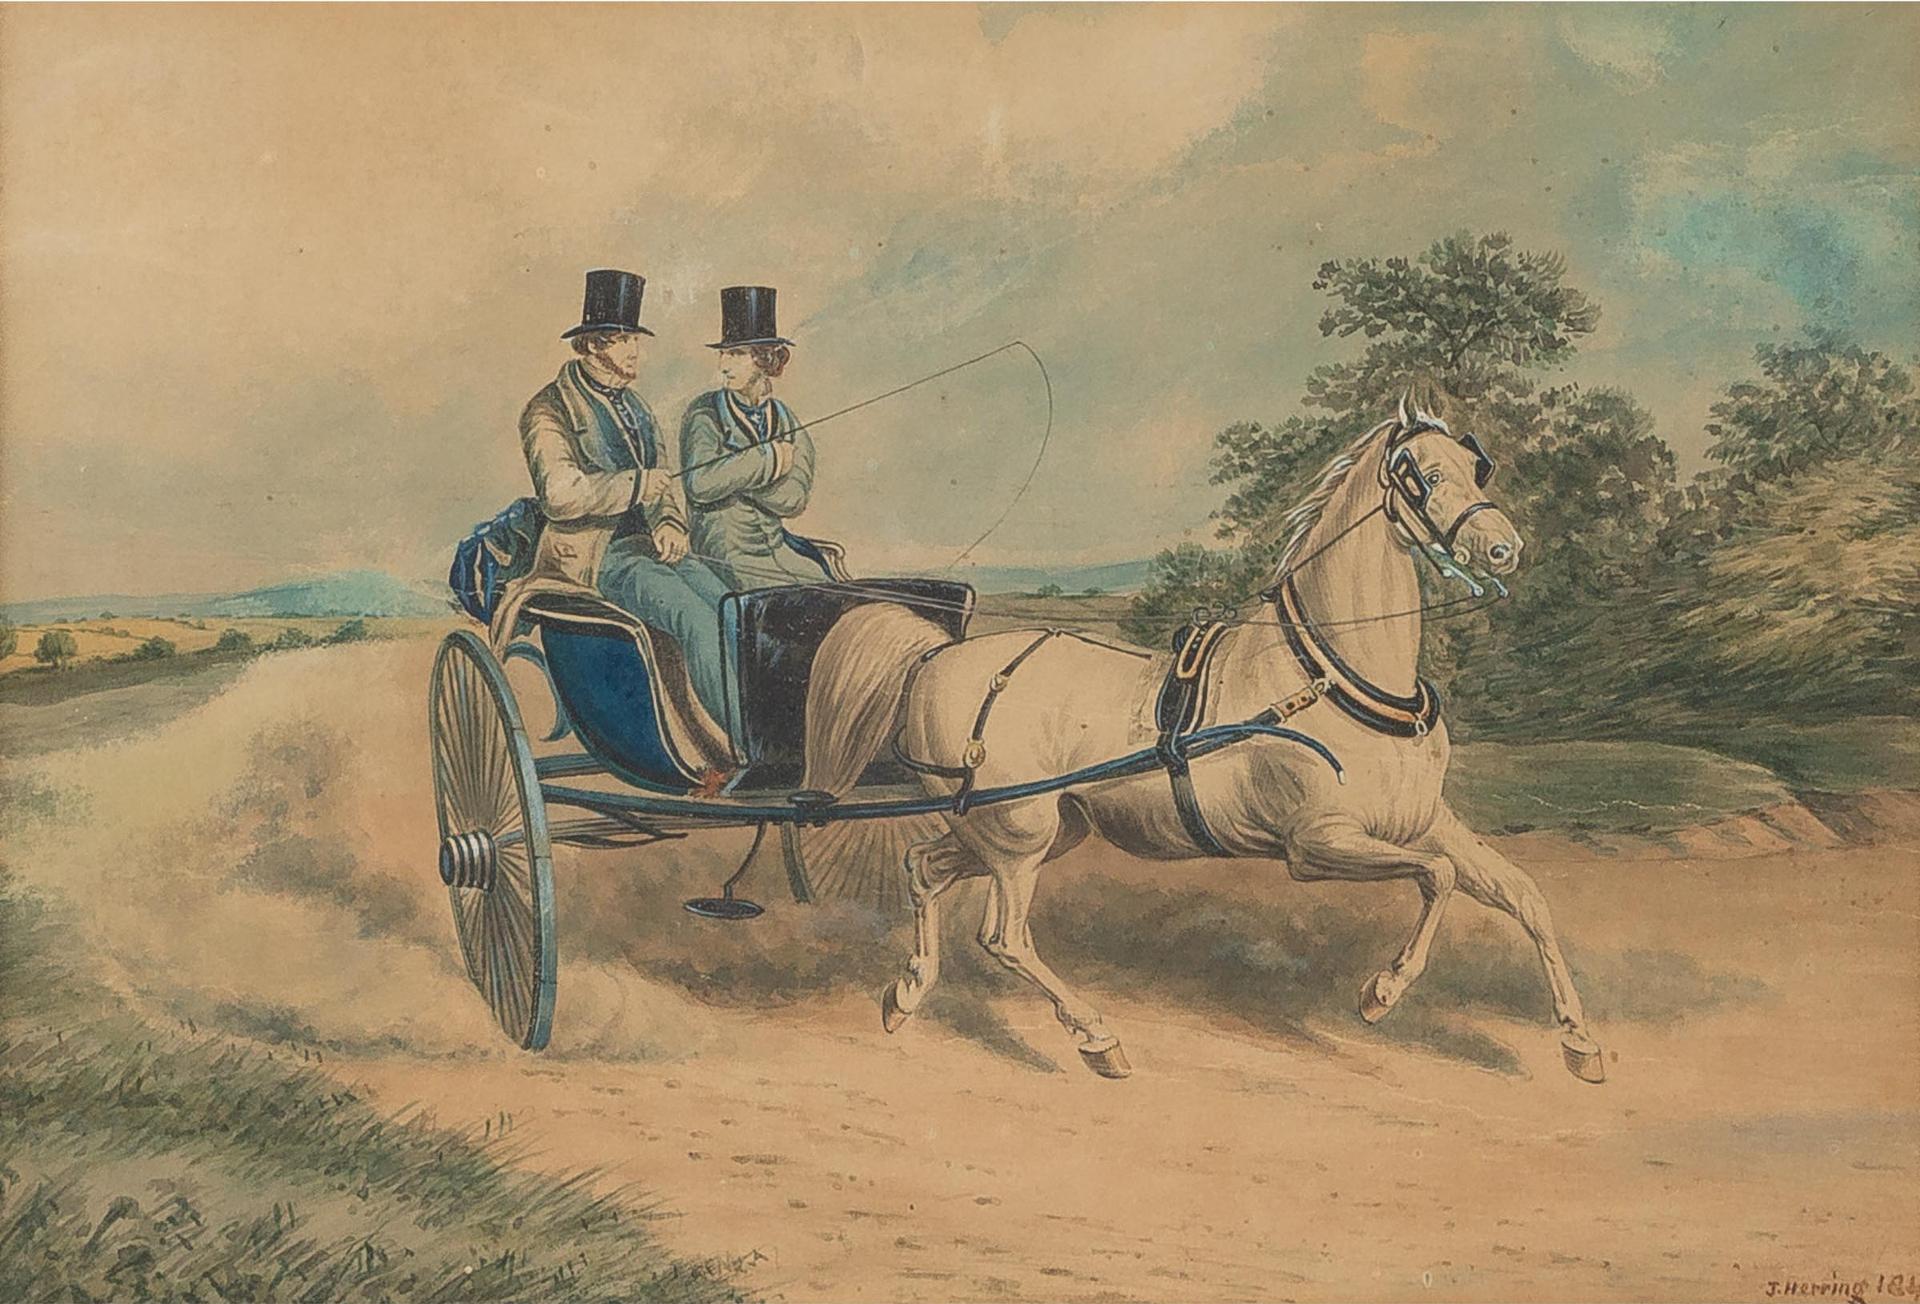 J. Herring - Men In Top Hats Driving A Carriage, 1841